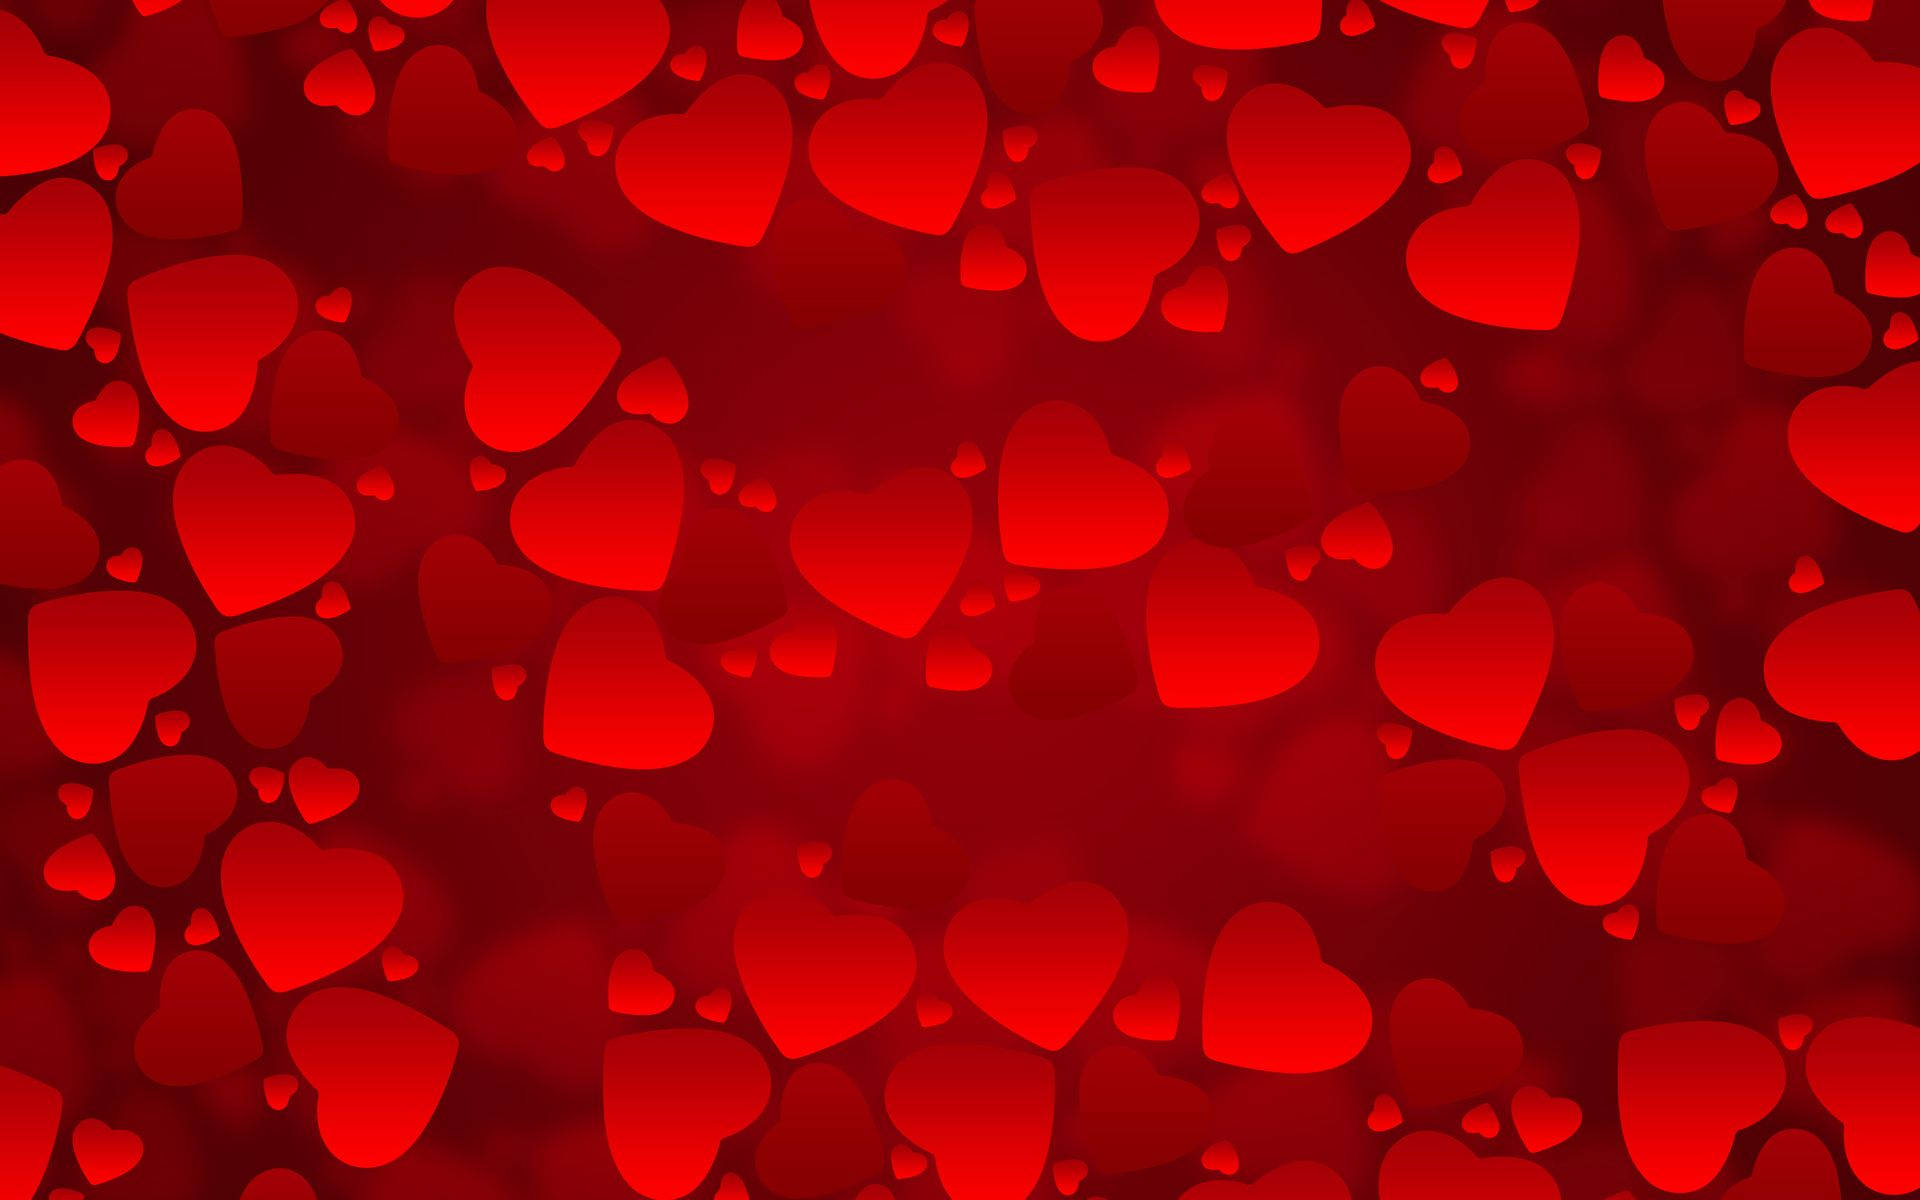 An Endless Field of Floating Hearts Wallpaper